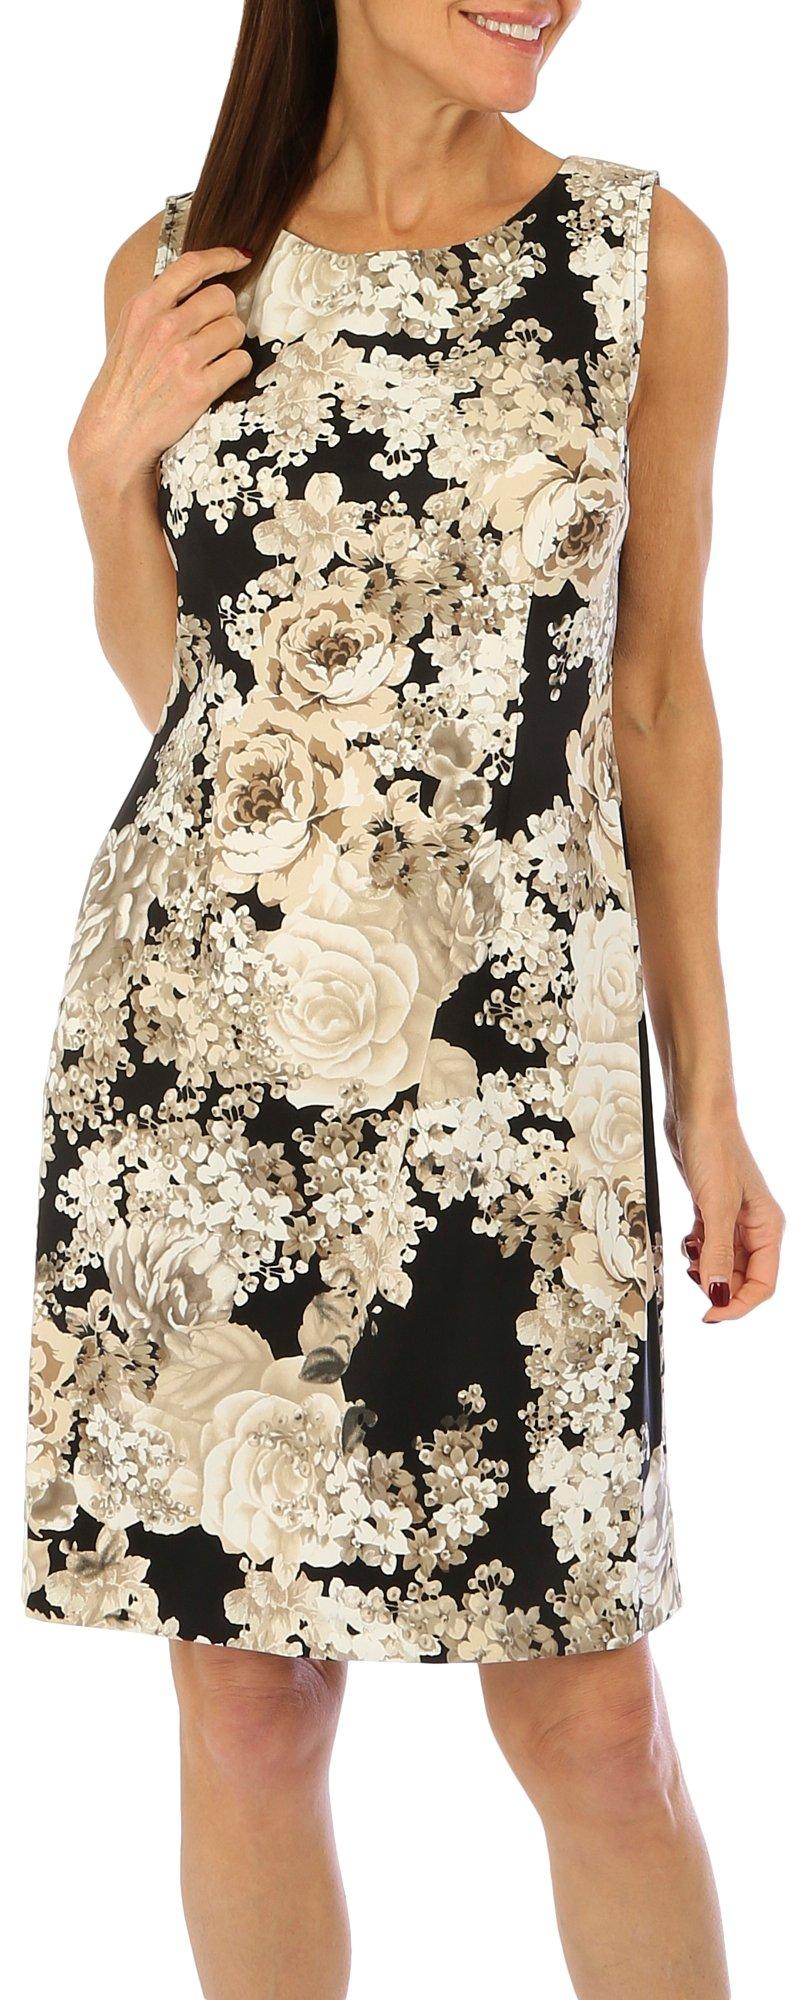 Connected Apparel Womens Floral Sheath Dress